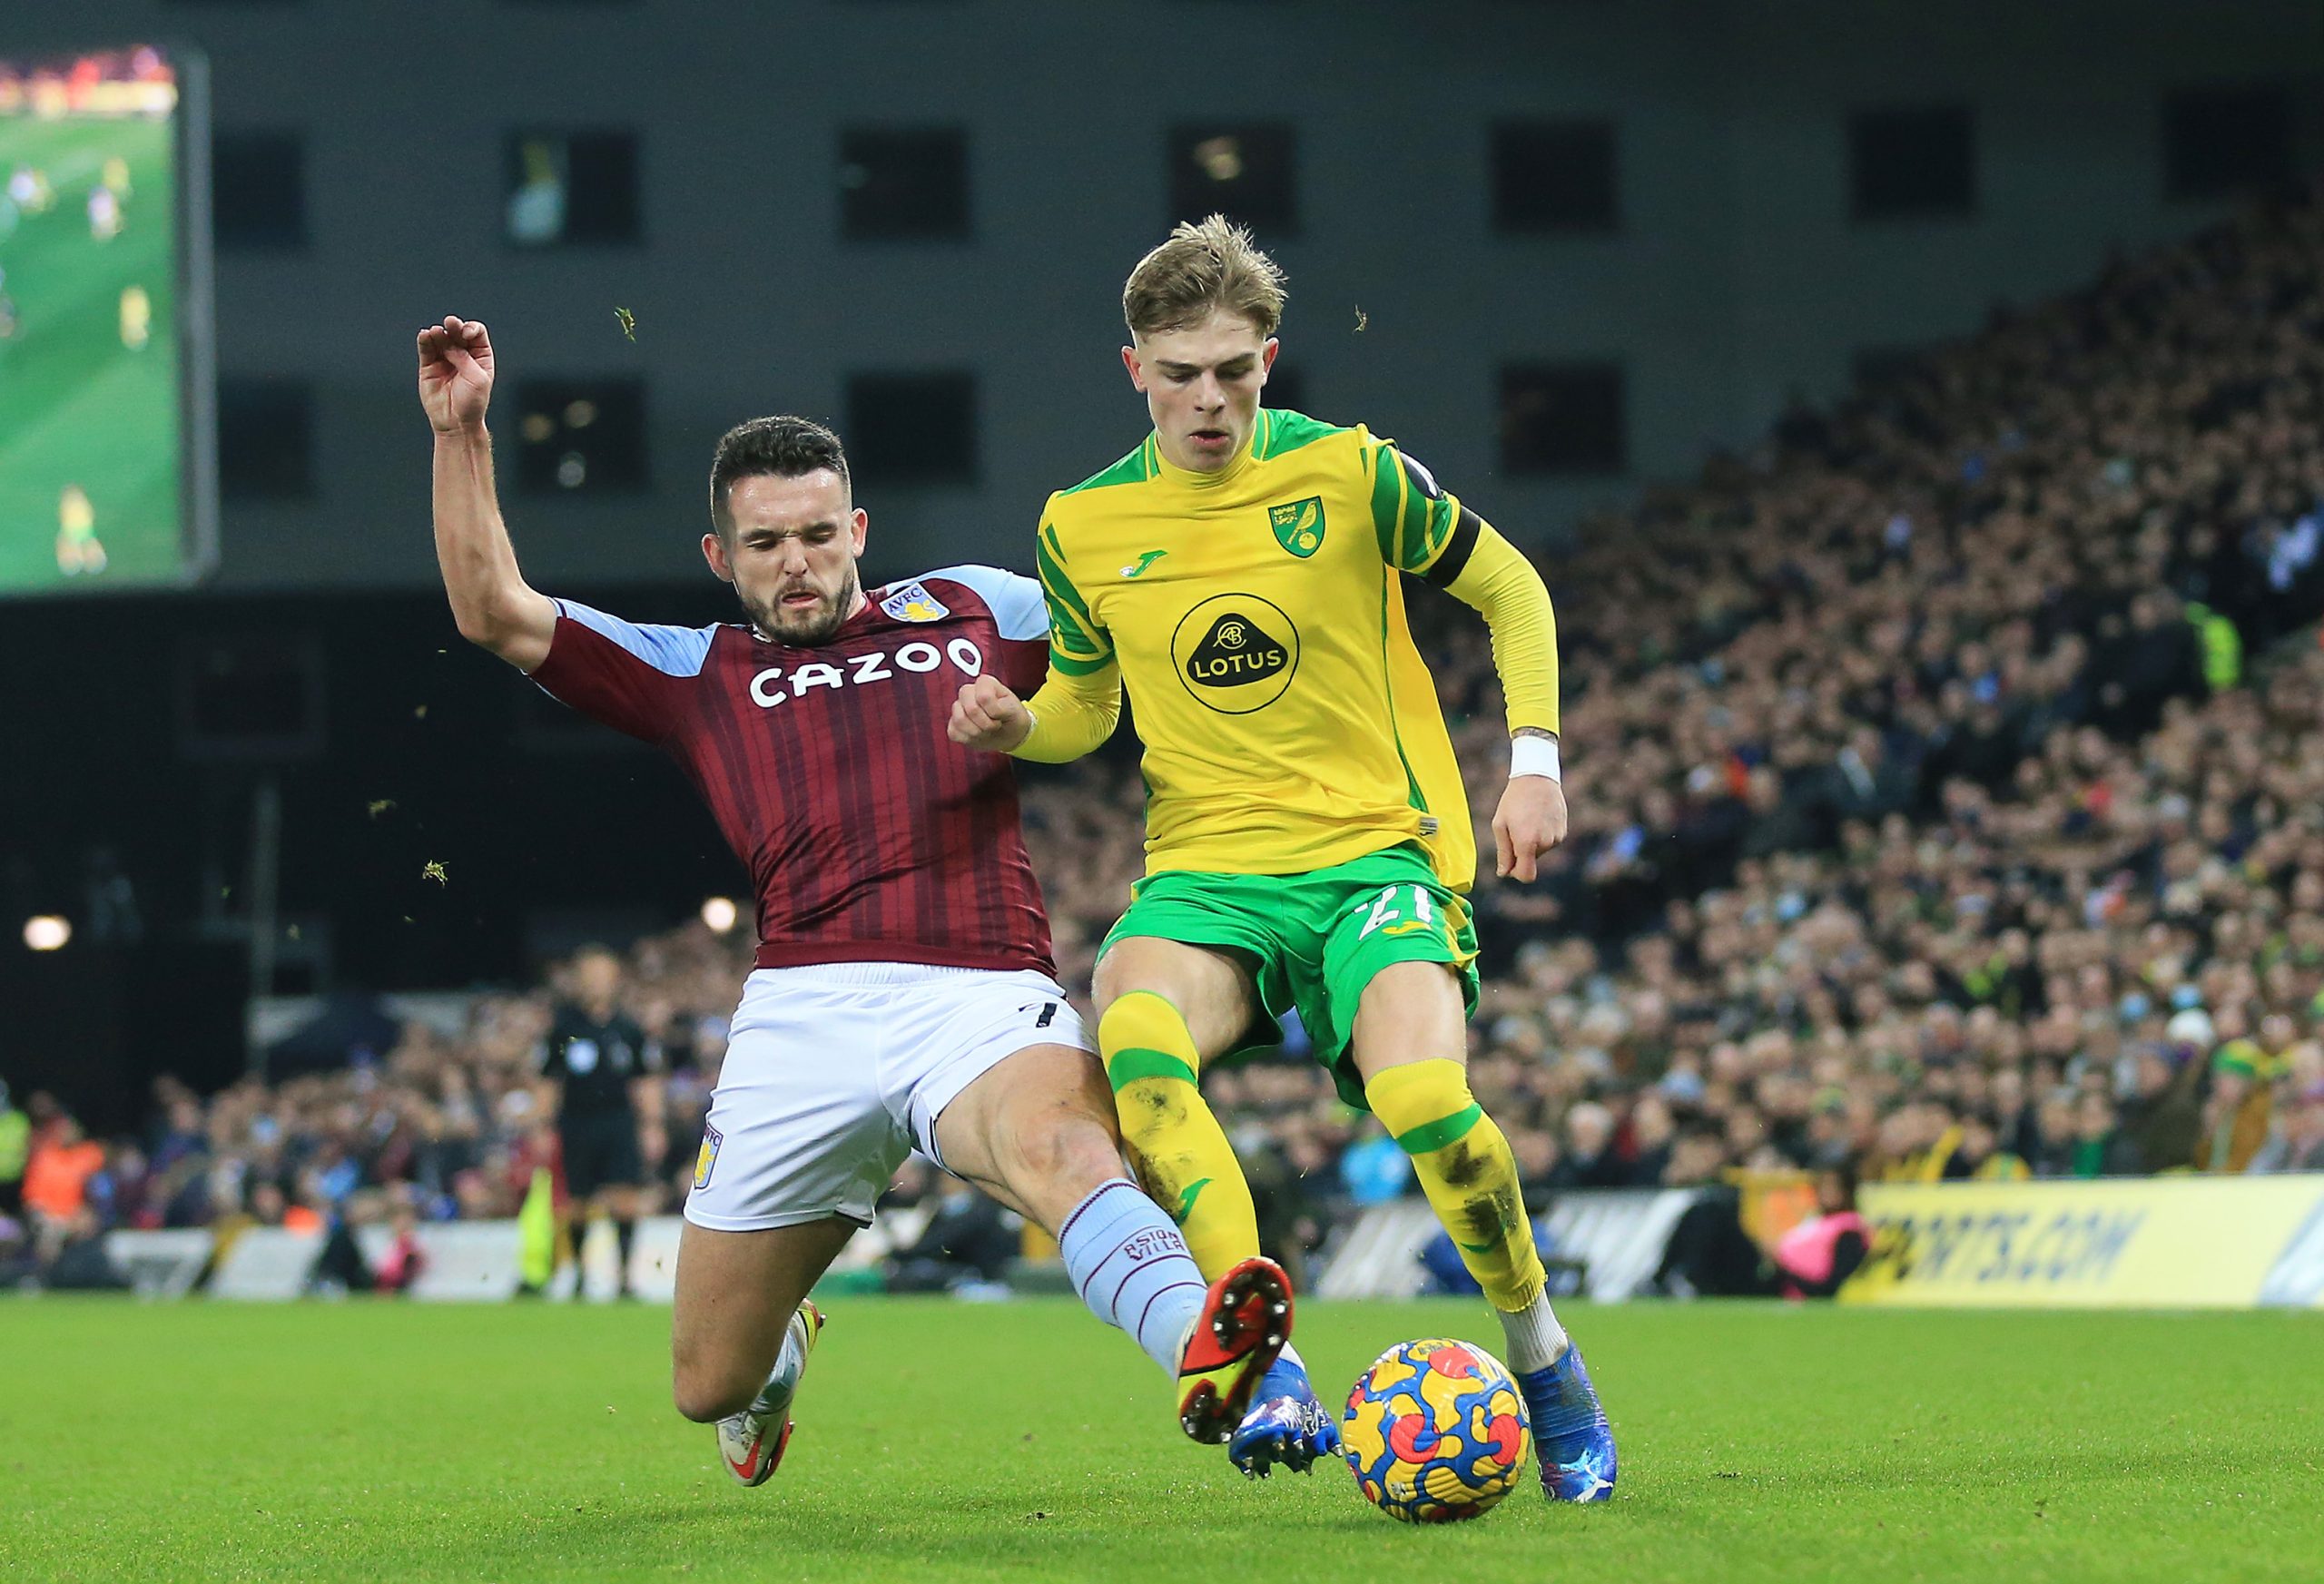 NORWICH, ENGLAND - DECEMBER 14: Brandon Williams of Norwich City is challenged by John McGinn of Aston Villa during the Premier League match between Norwich City and Aston Villa at Carrow Road on December 14, 2021 in Norwich, England. (Photo by Stephen Pond/Getty Images)
The 4th Official uses images provided by the following image agency:
Getty Images (https://www.gettyimages.de/)
Imago Images (https://www.imago-images.de/)